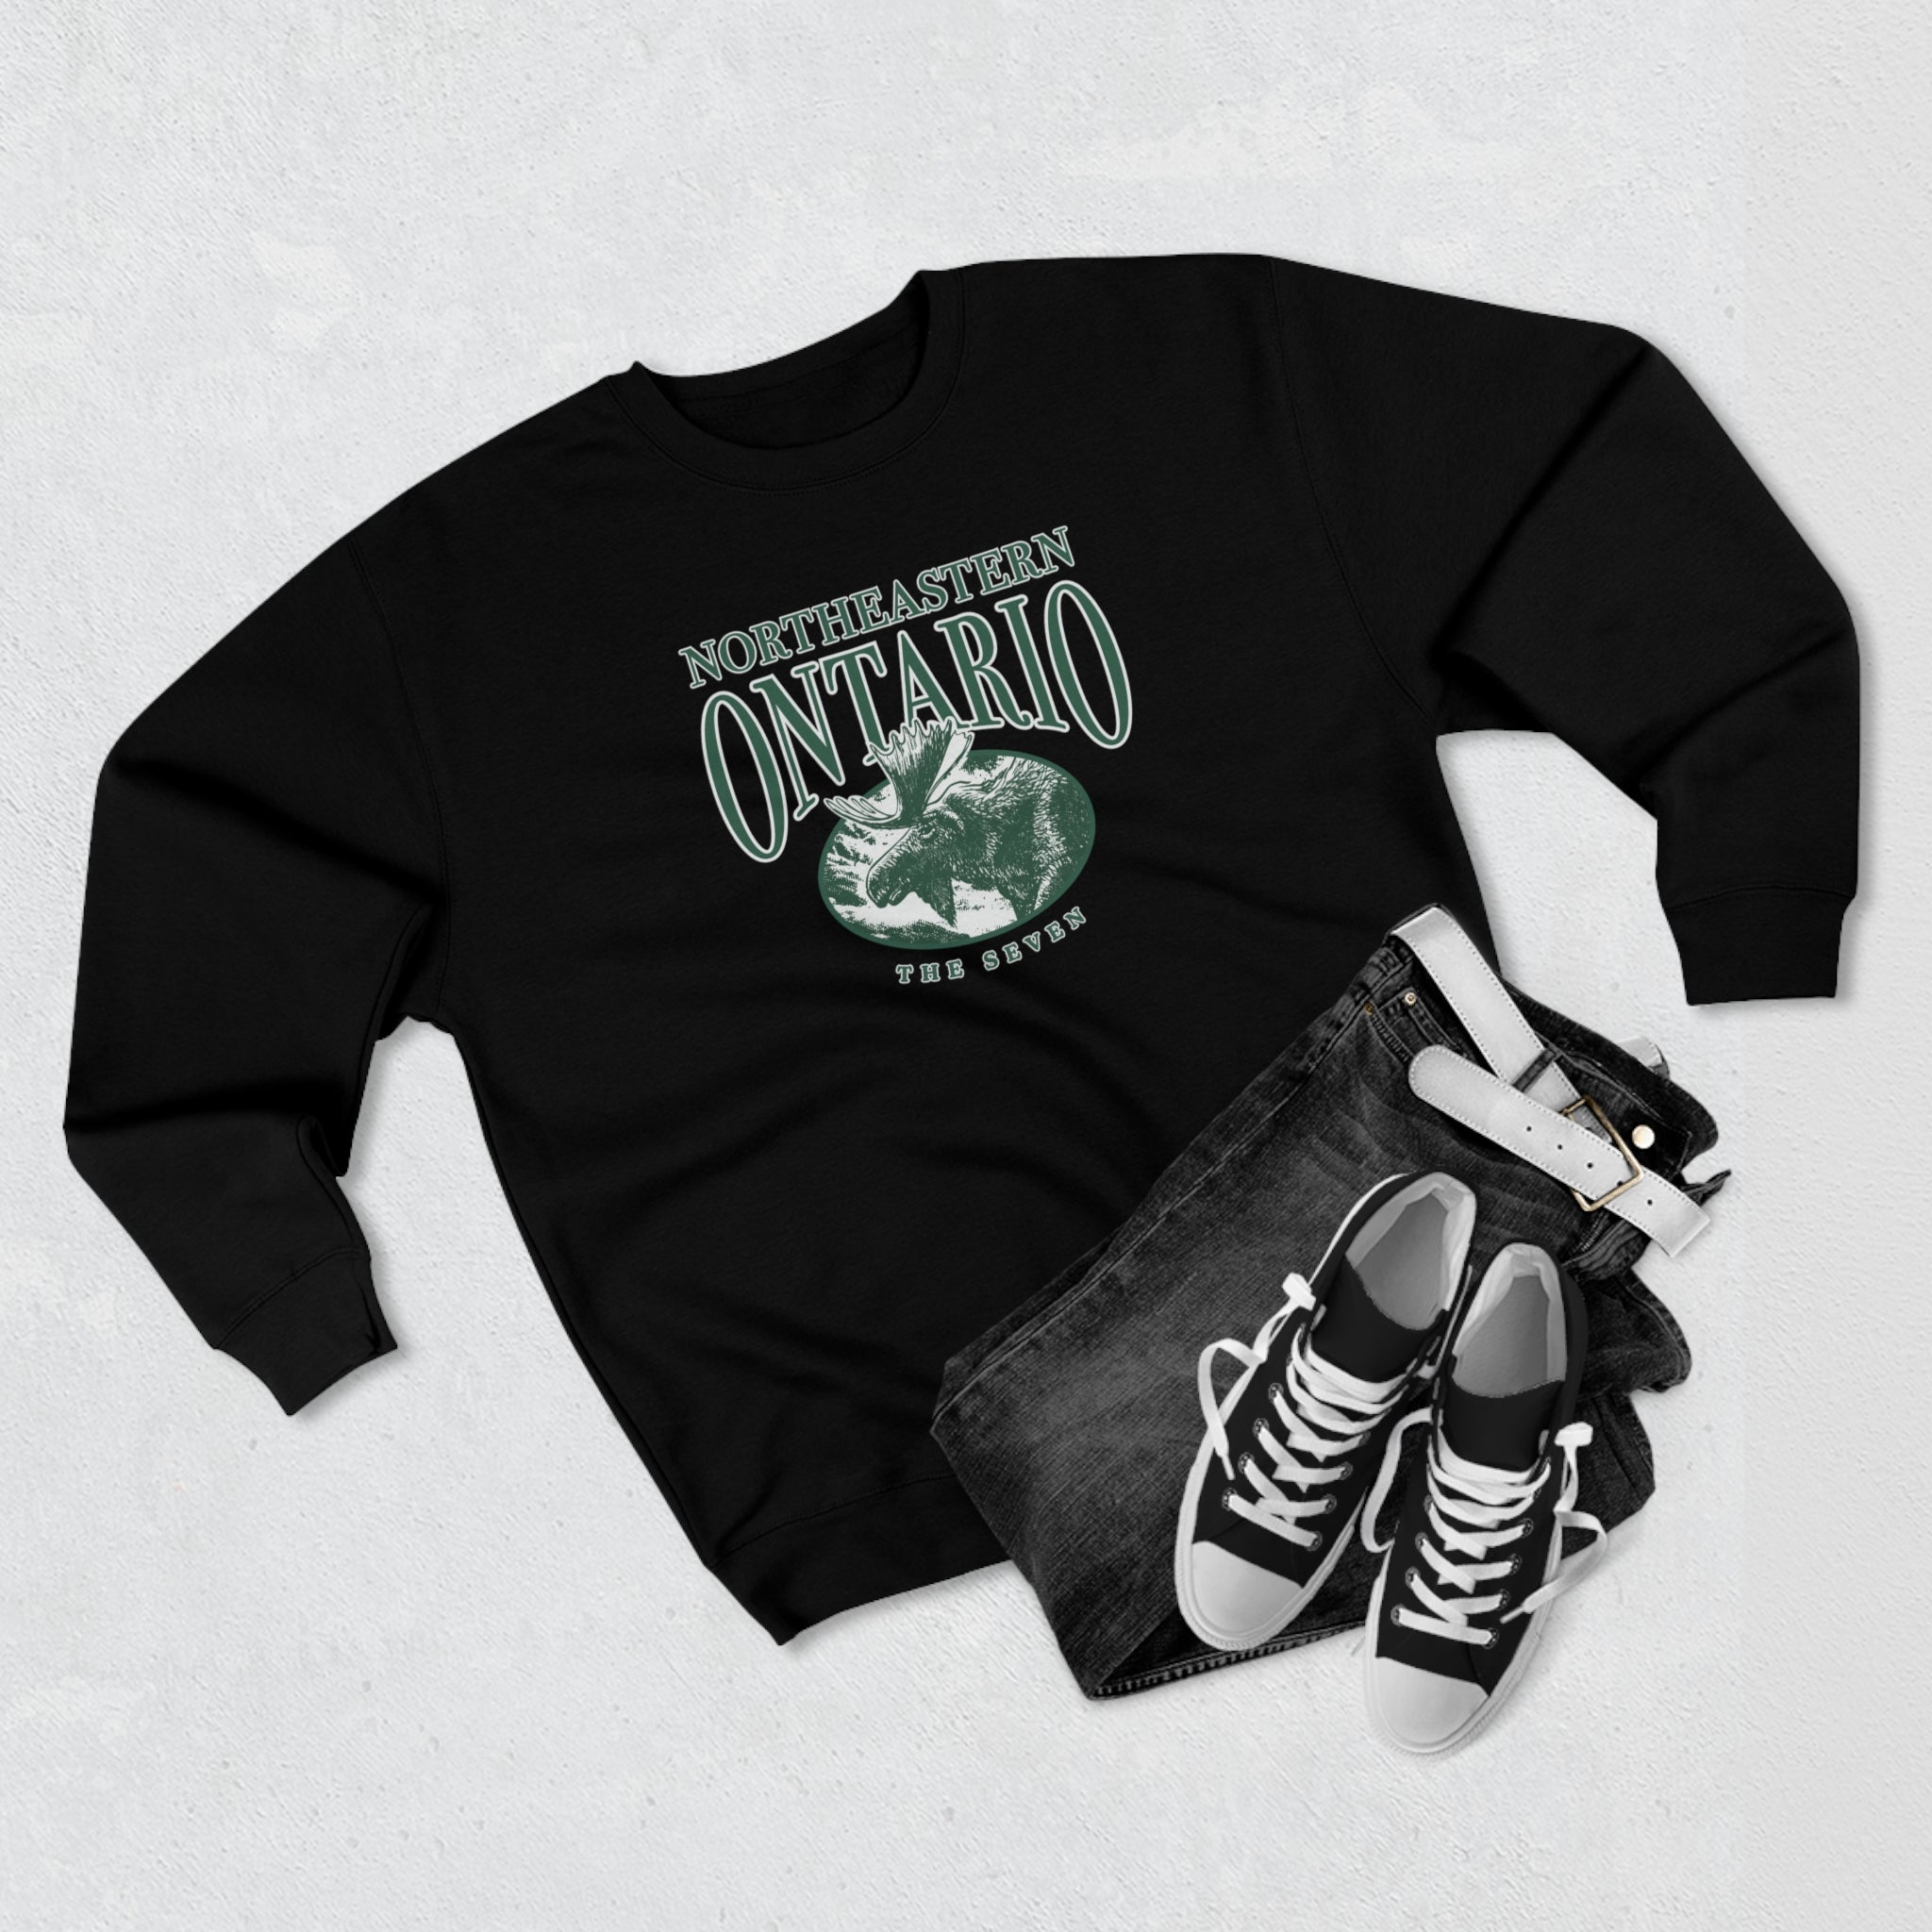 a black crewneck sweater with a logo of a moose and "Northerneastern Ontario — The Seven" on the front